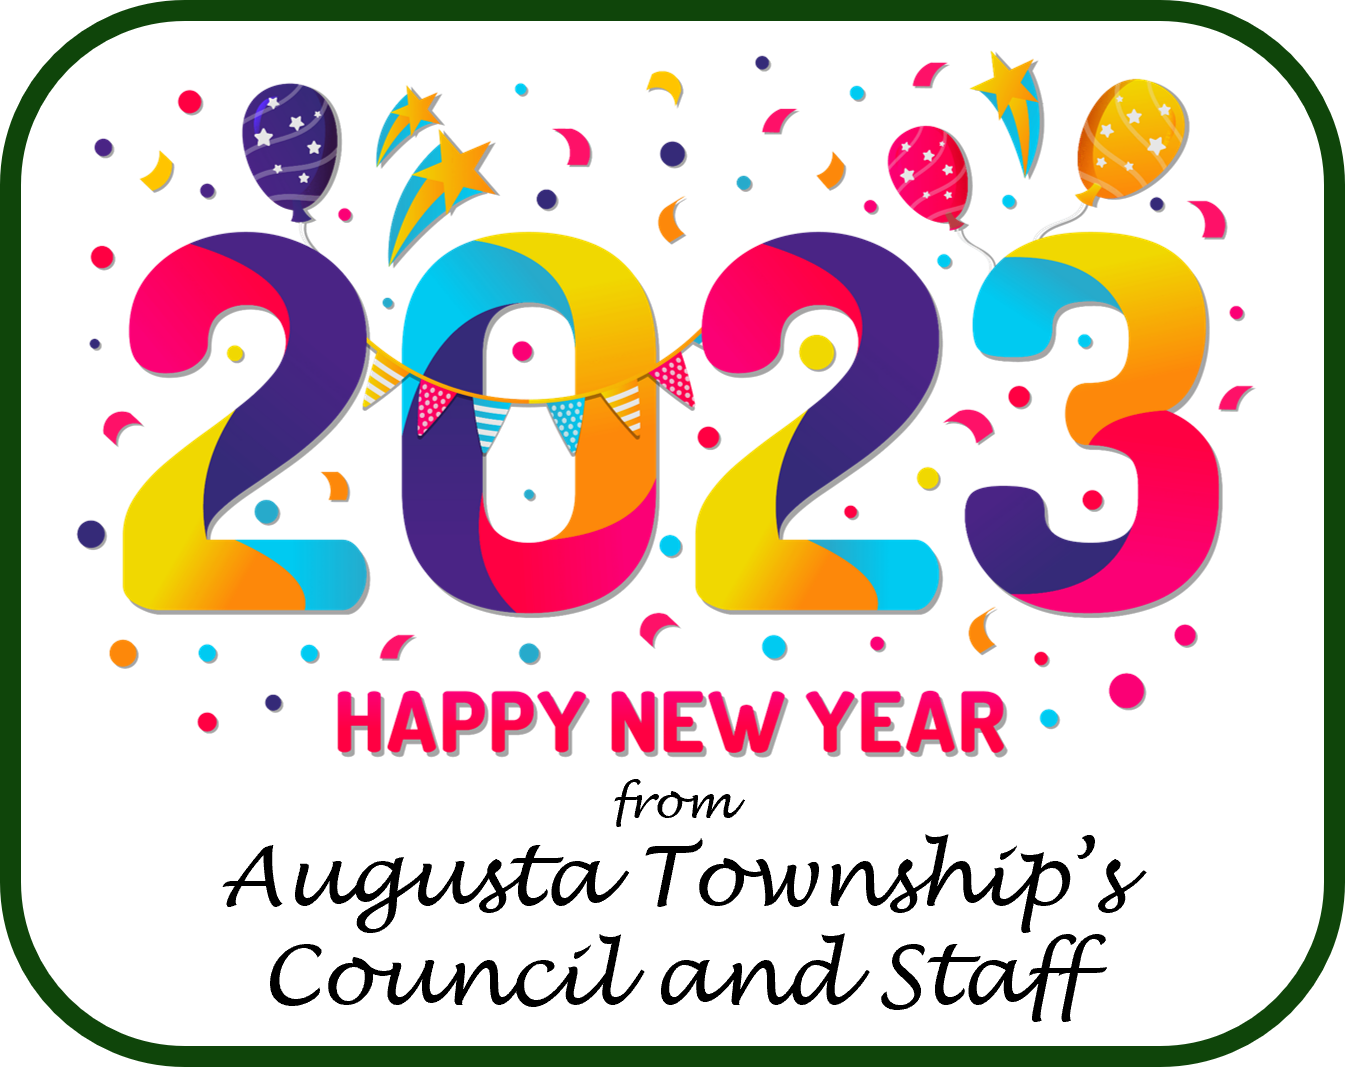 2023 - Happy New Year from Augusta Township's Council and Staff